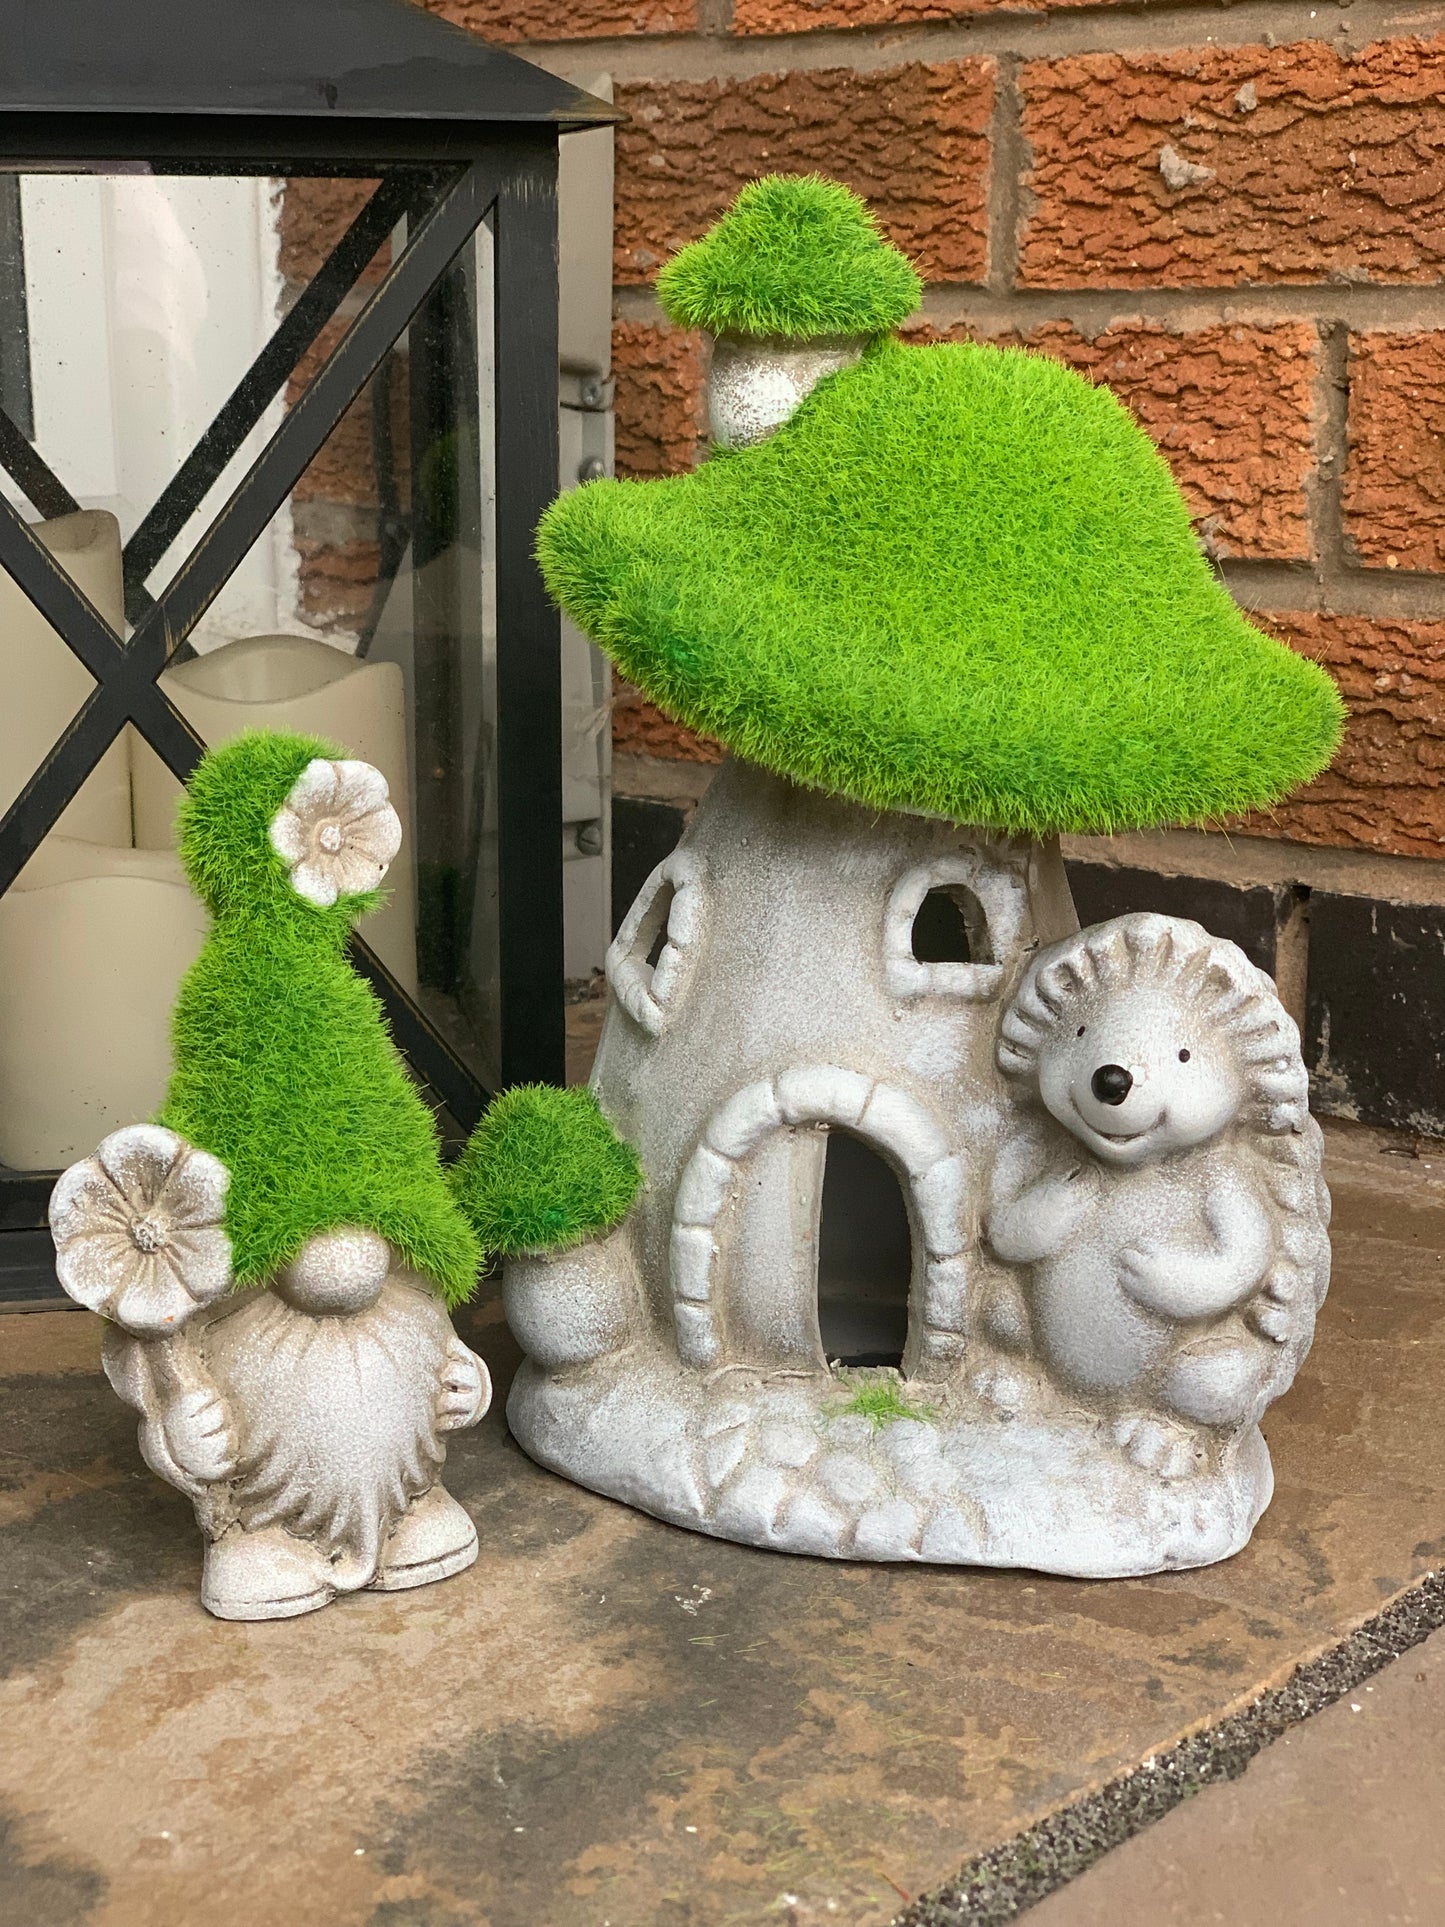 Grassy Toadstool House with hedgehog